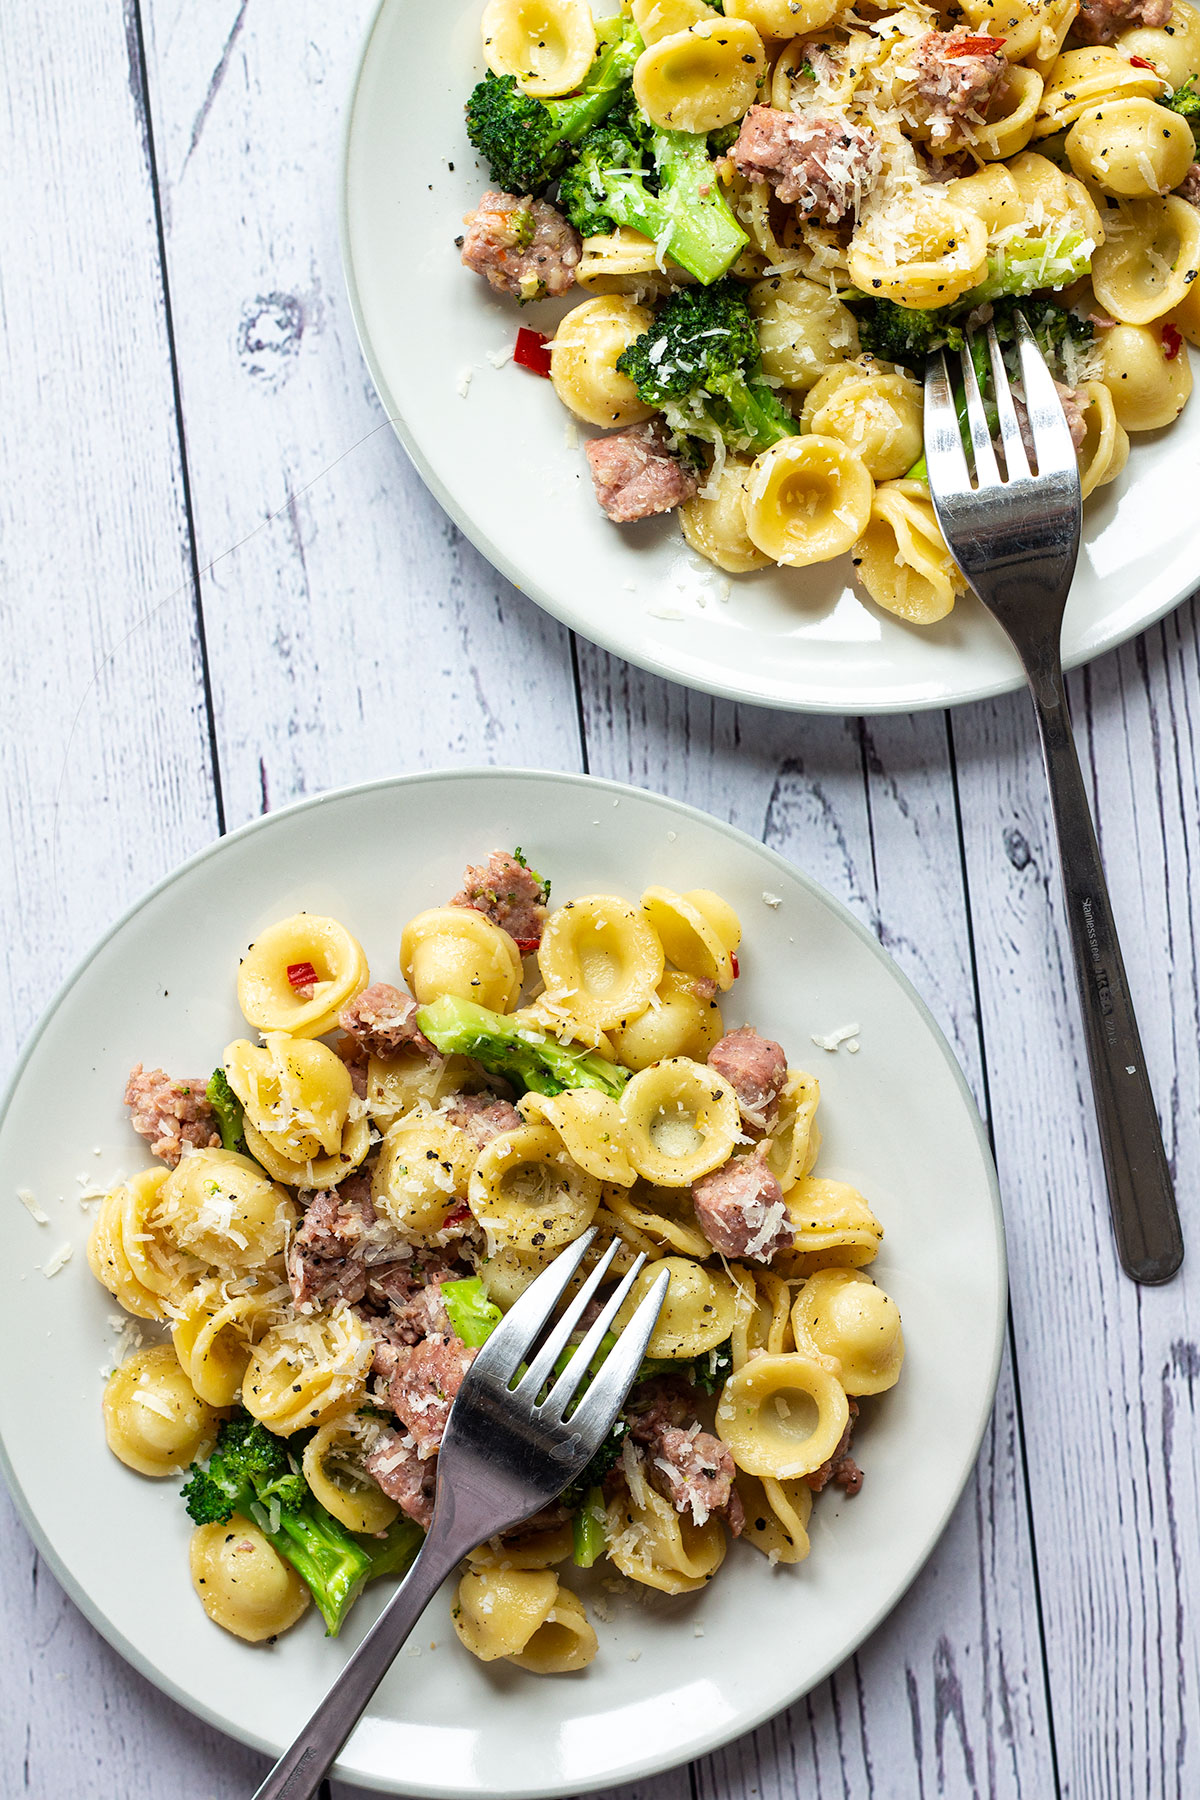 Two plates of broccoli and sausage pasta.